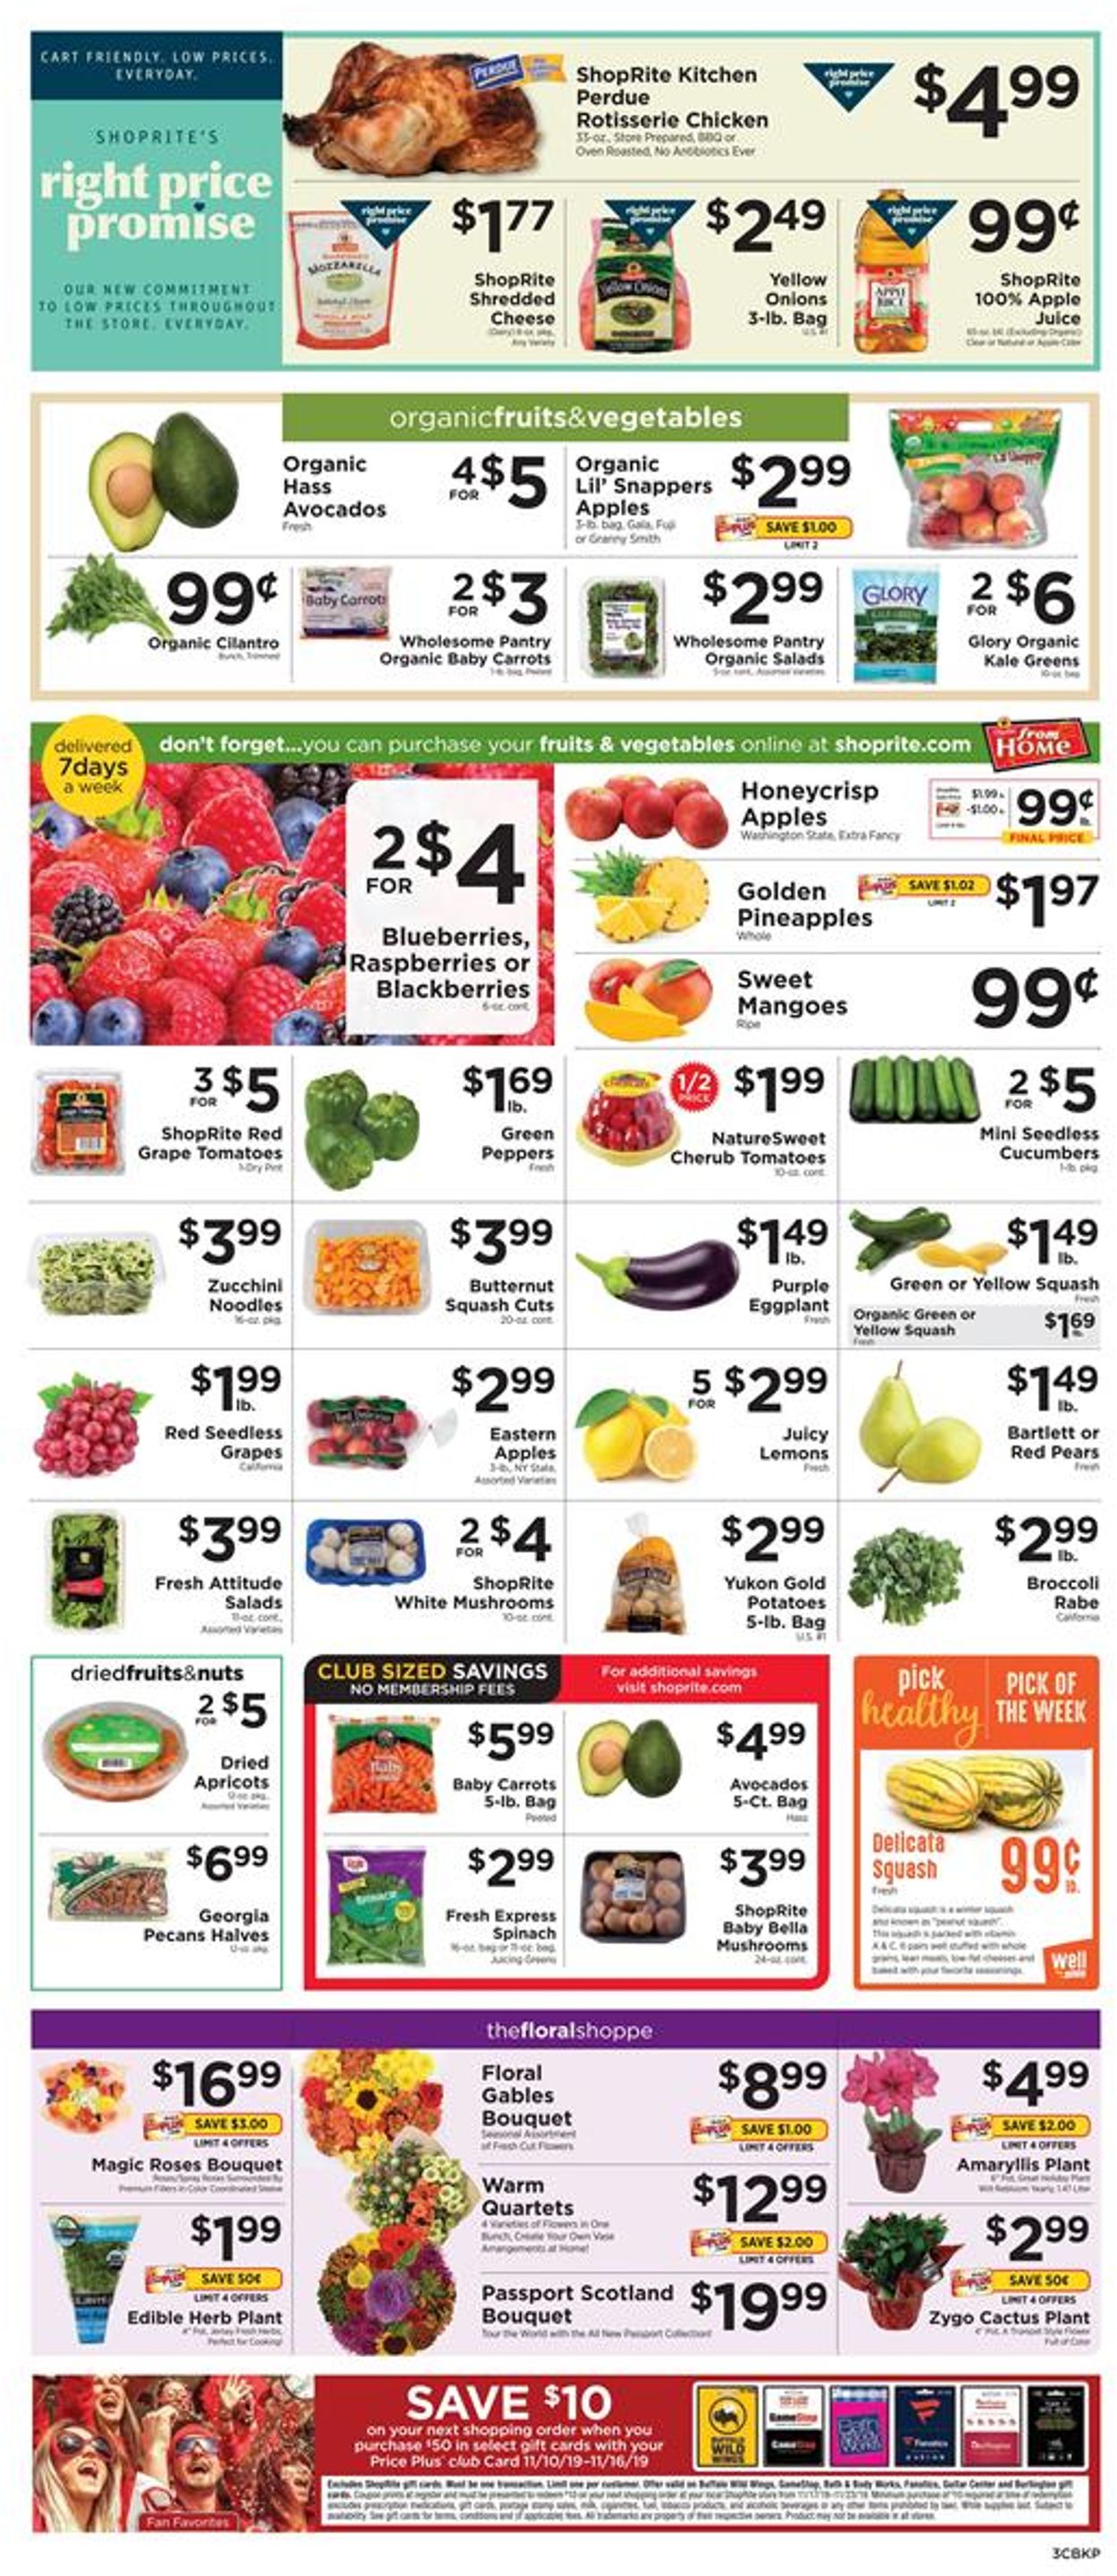 ShopRite Current weekly ad 11/10 - 11/16/2019 [3] - frequent-ads.com